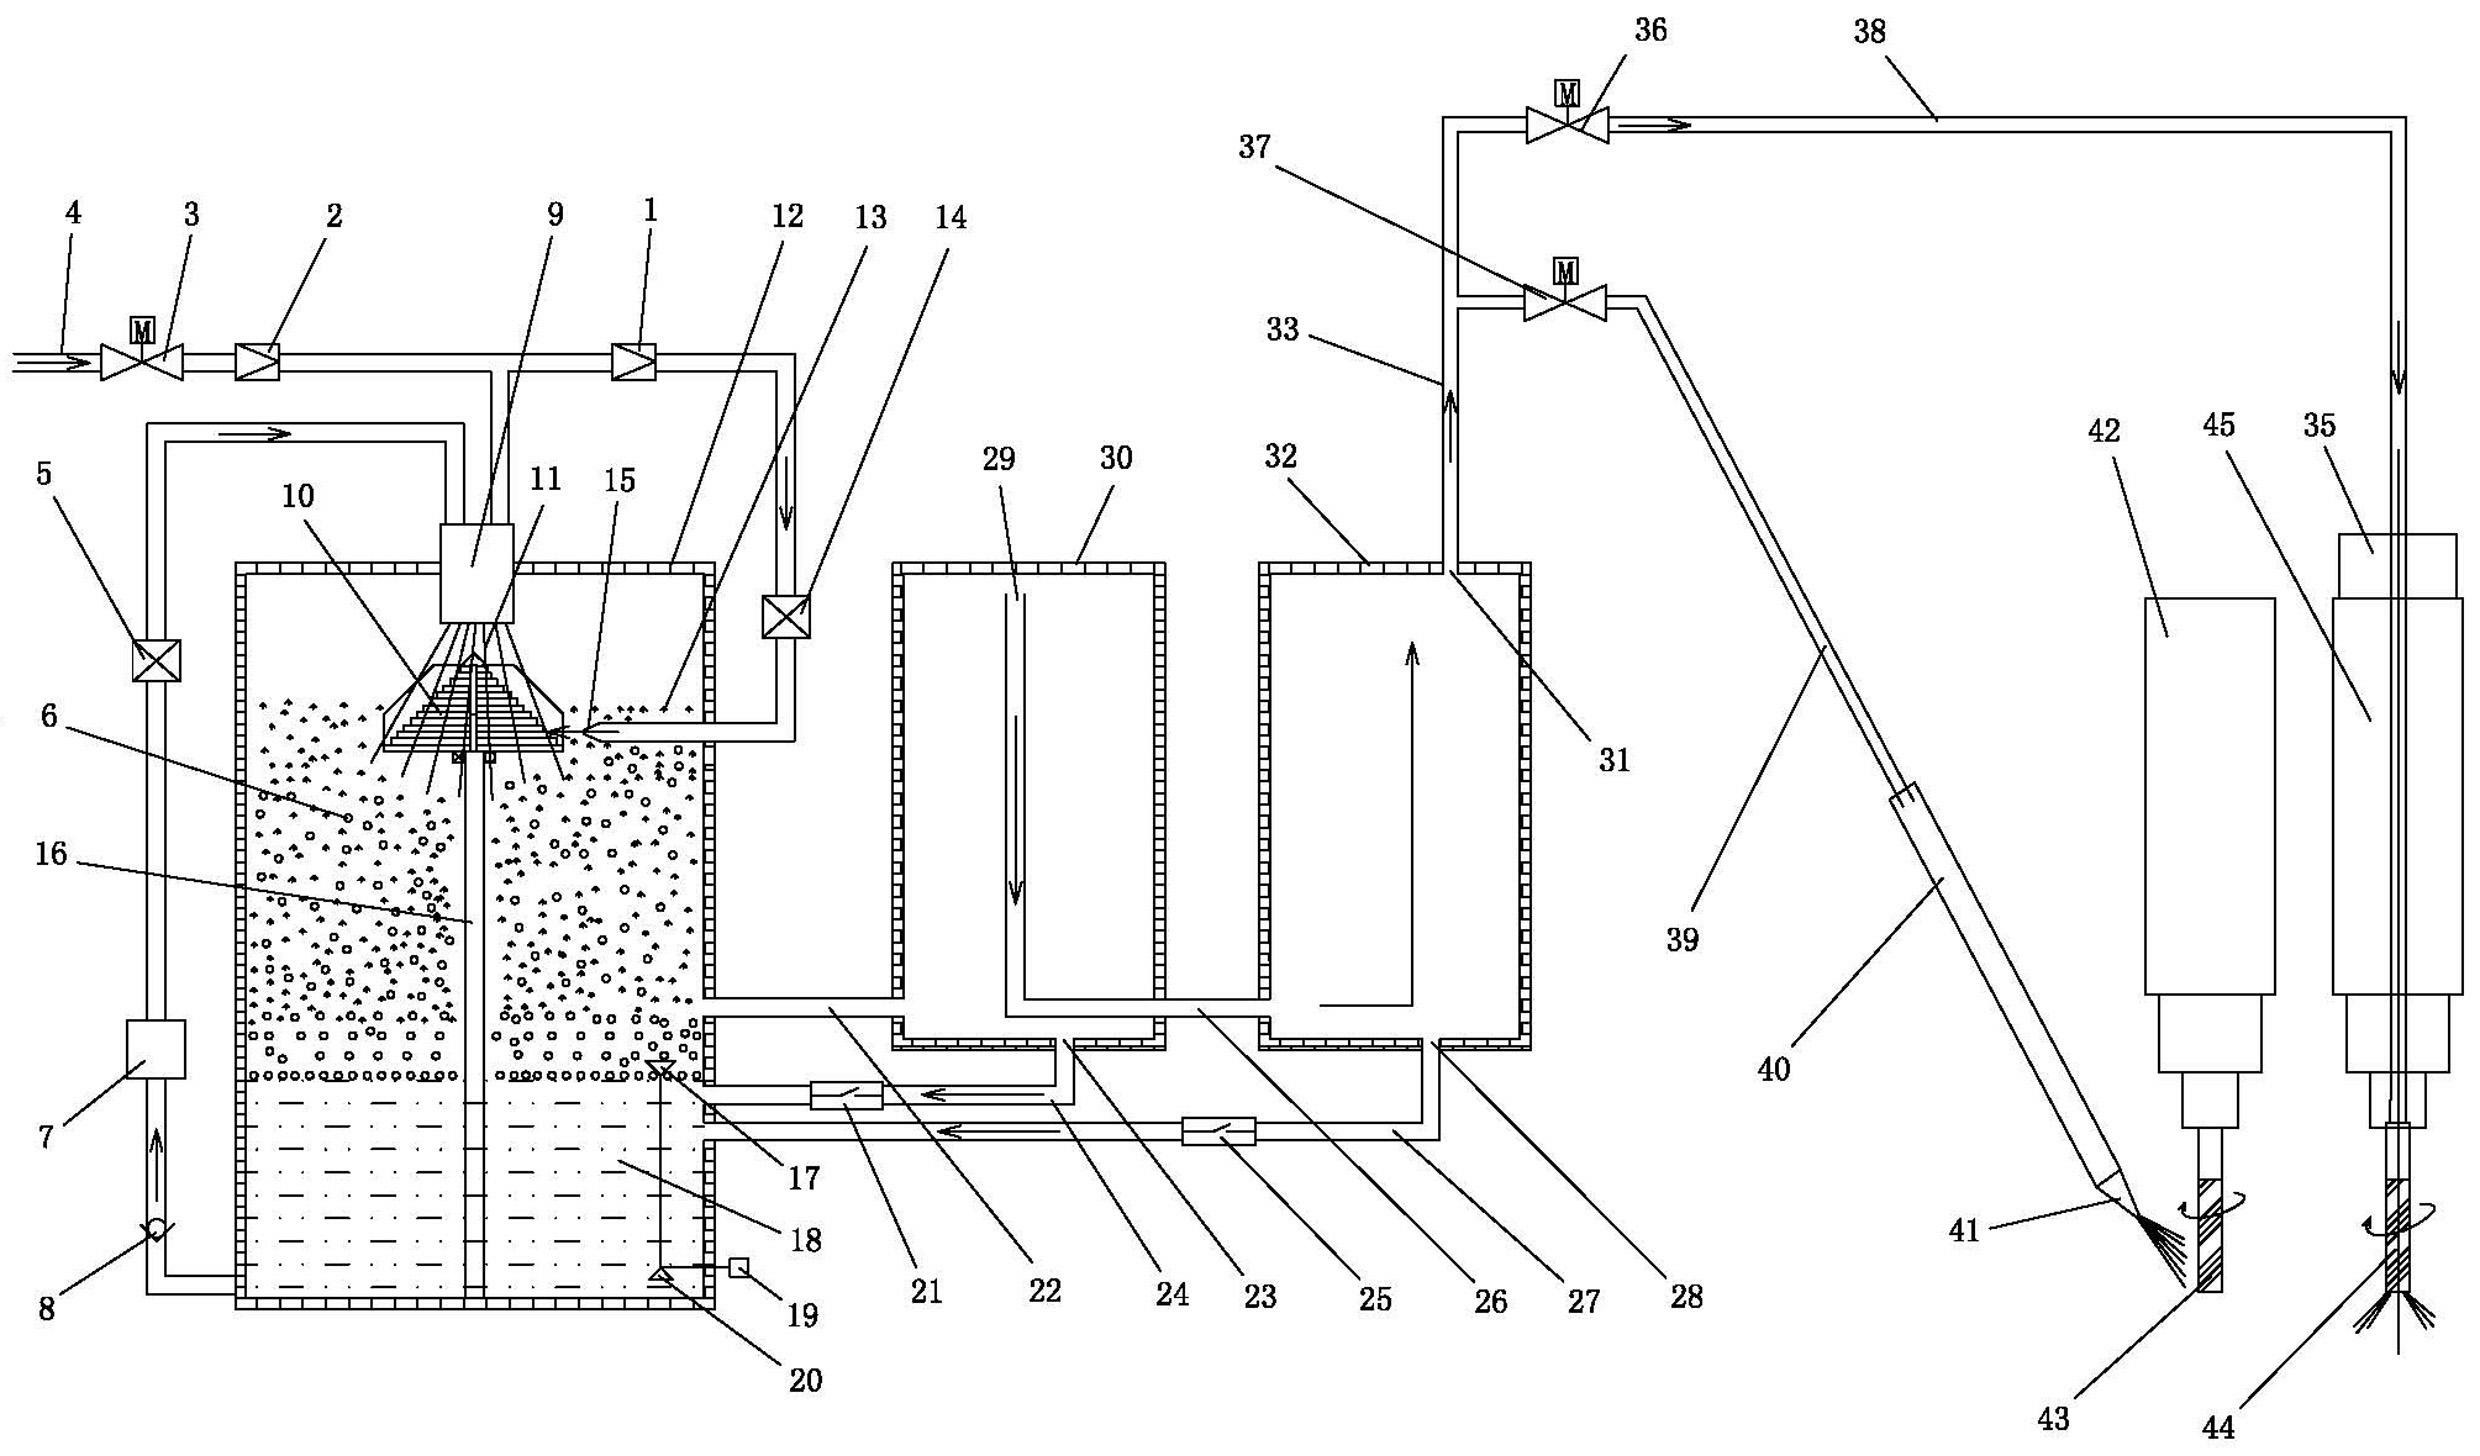 Minimal quantity lubrication (MQL) supply system for processing of outer-cooling type high-speed machine tool and inner-cooling type high-speed machine tool